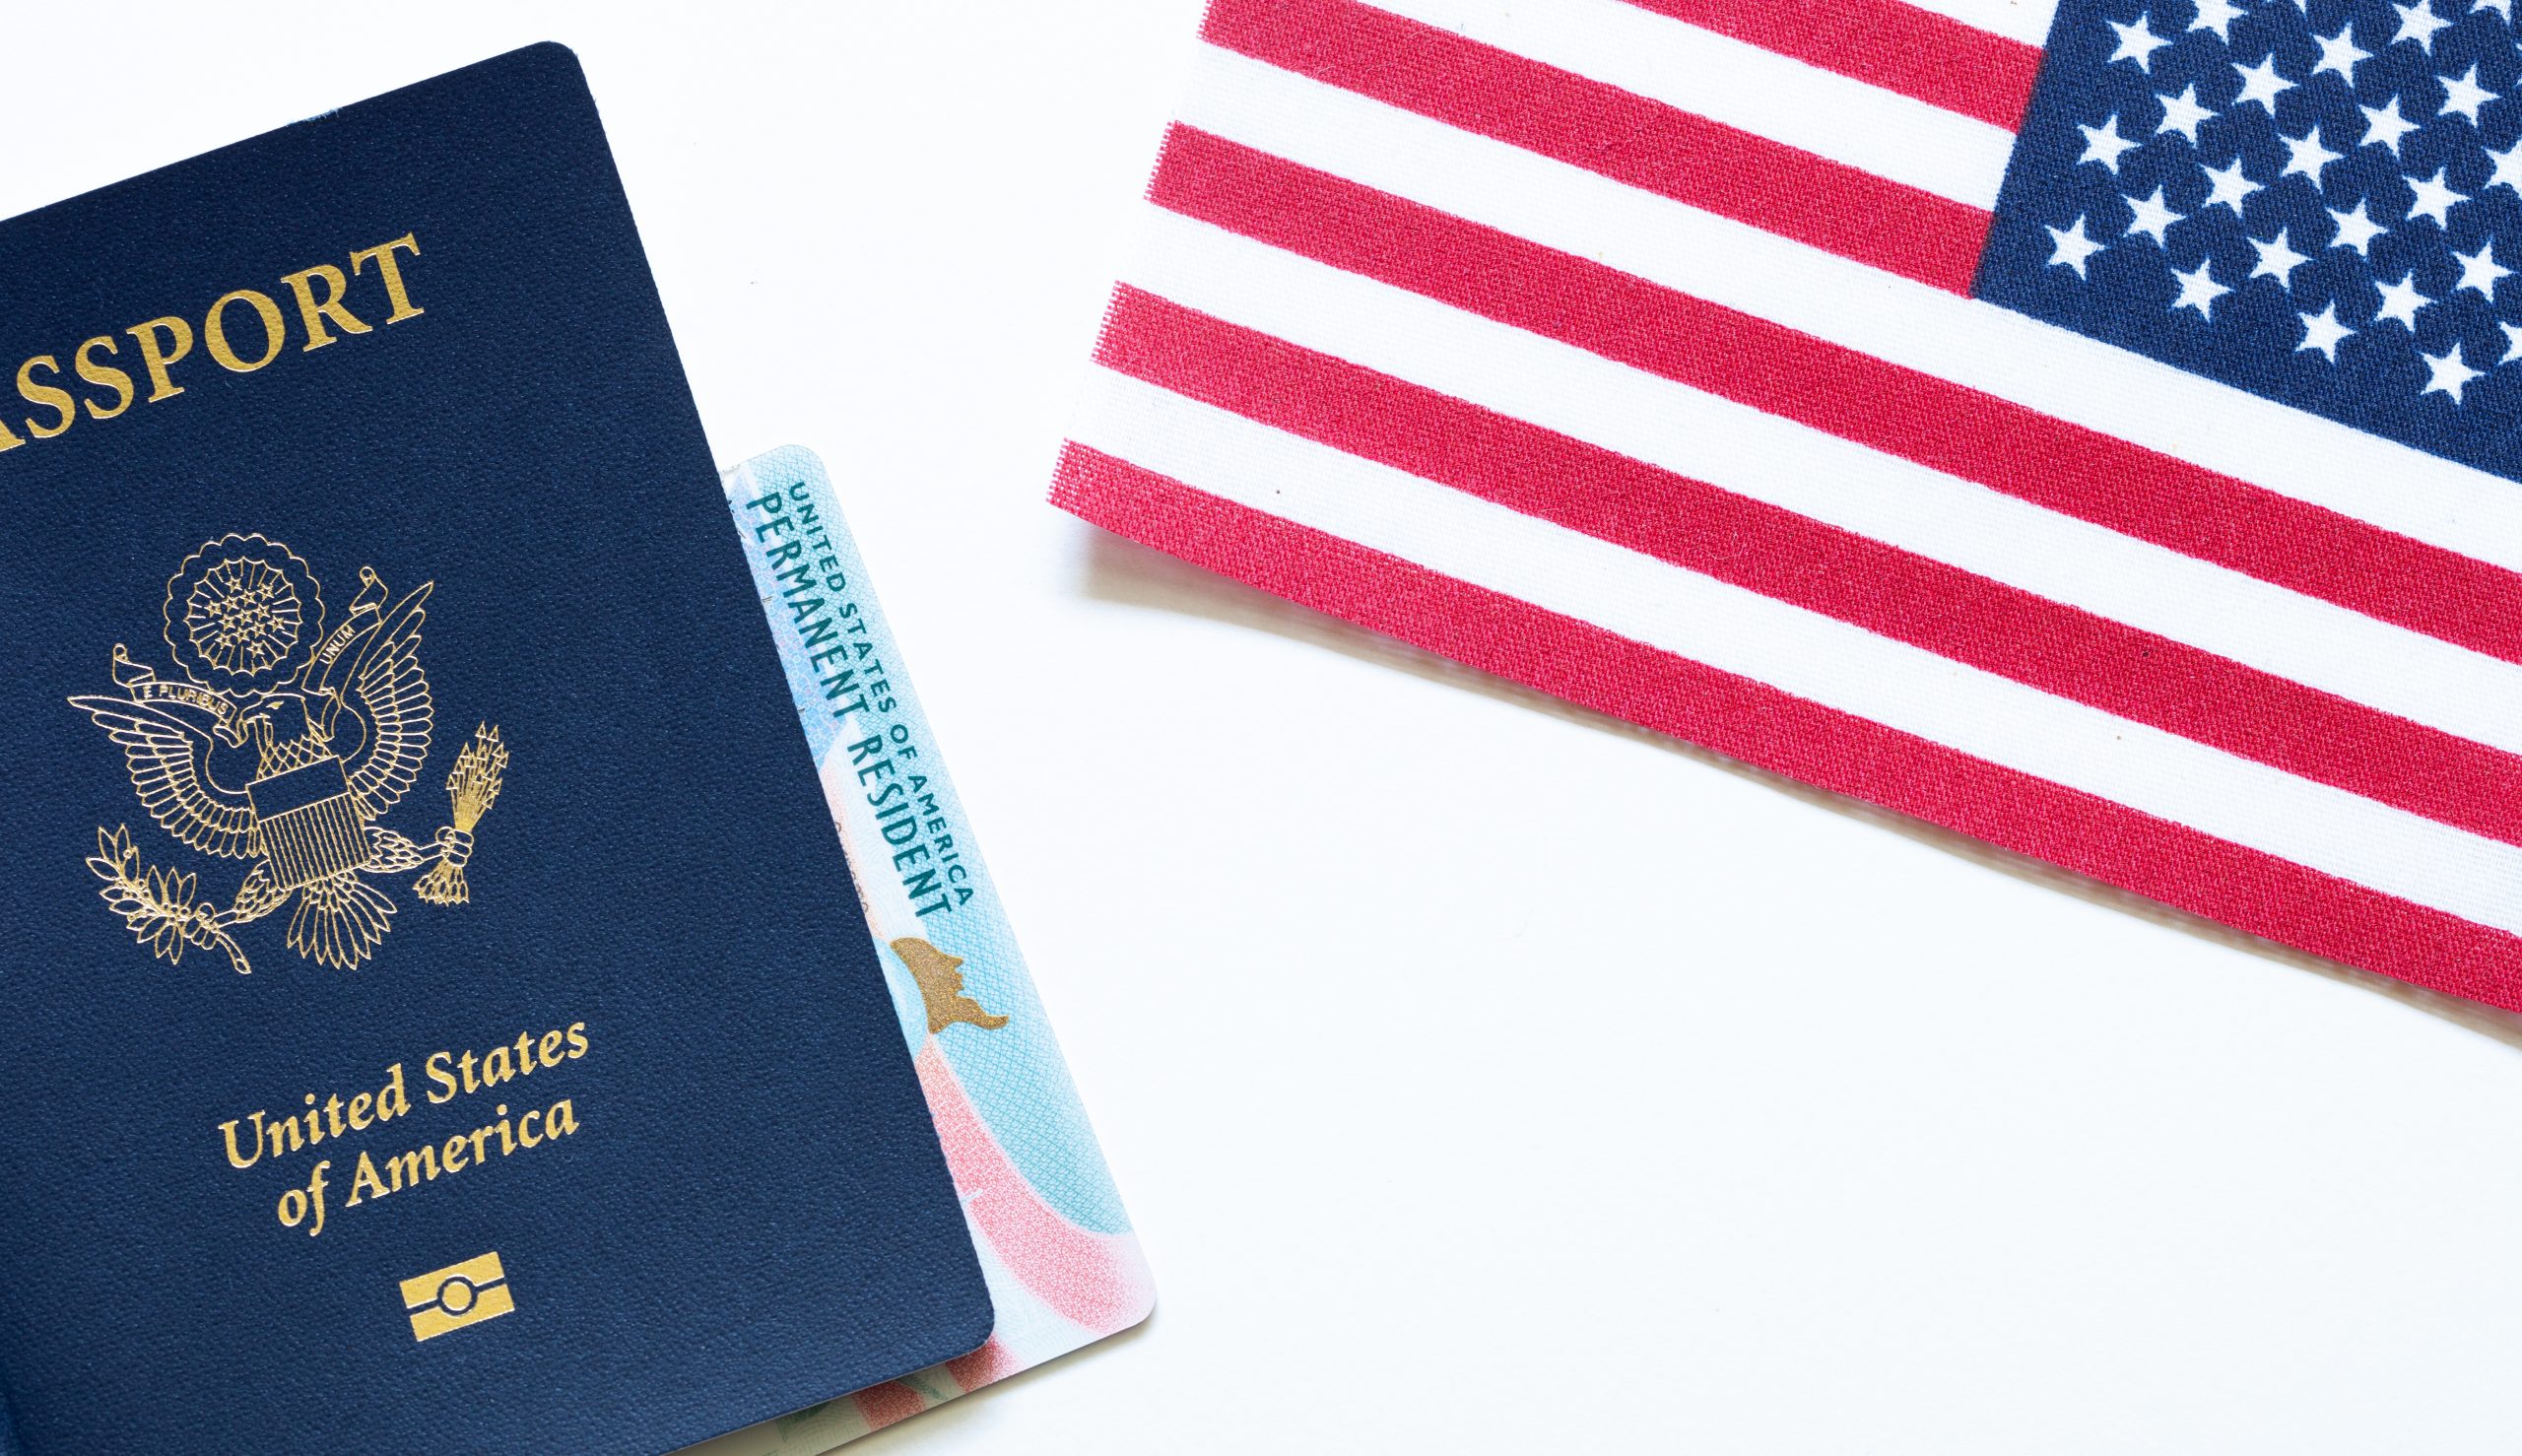 Do . citizens and green card holders need a visa to visit Schengen area?